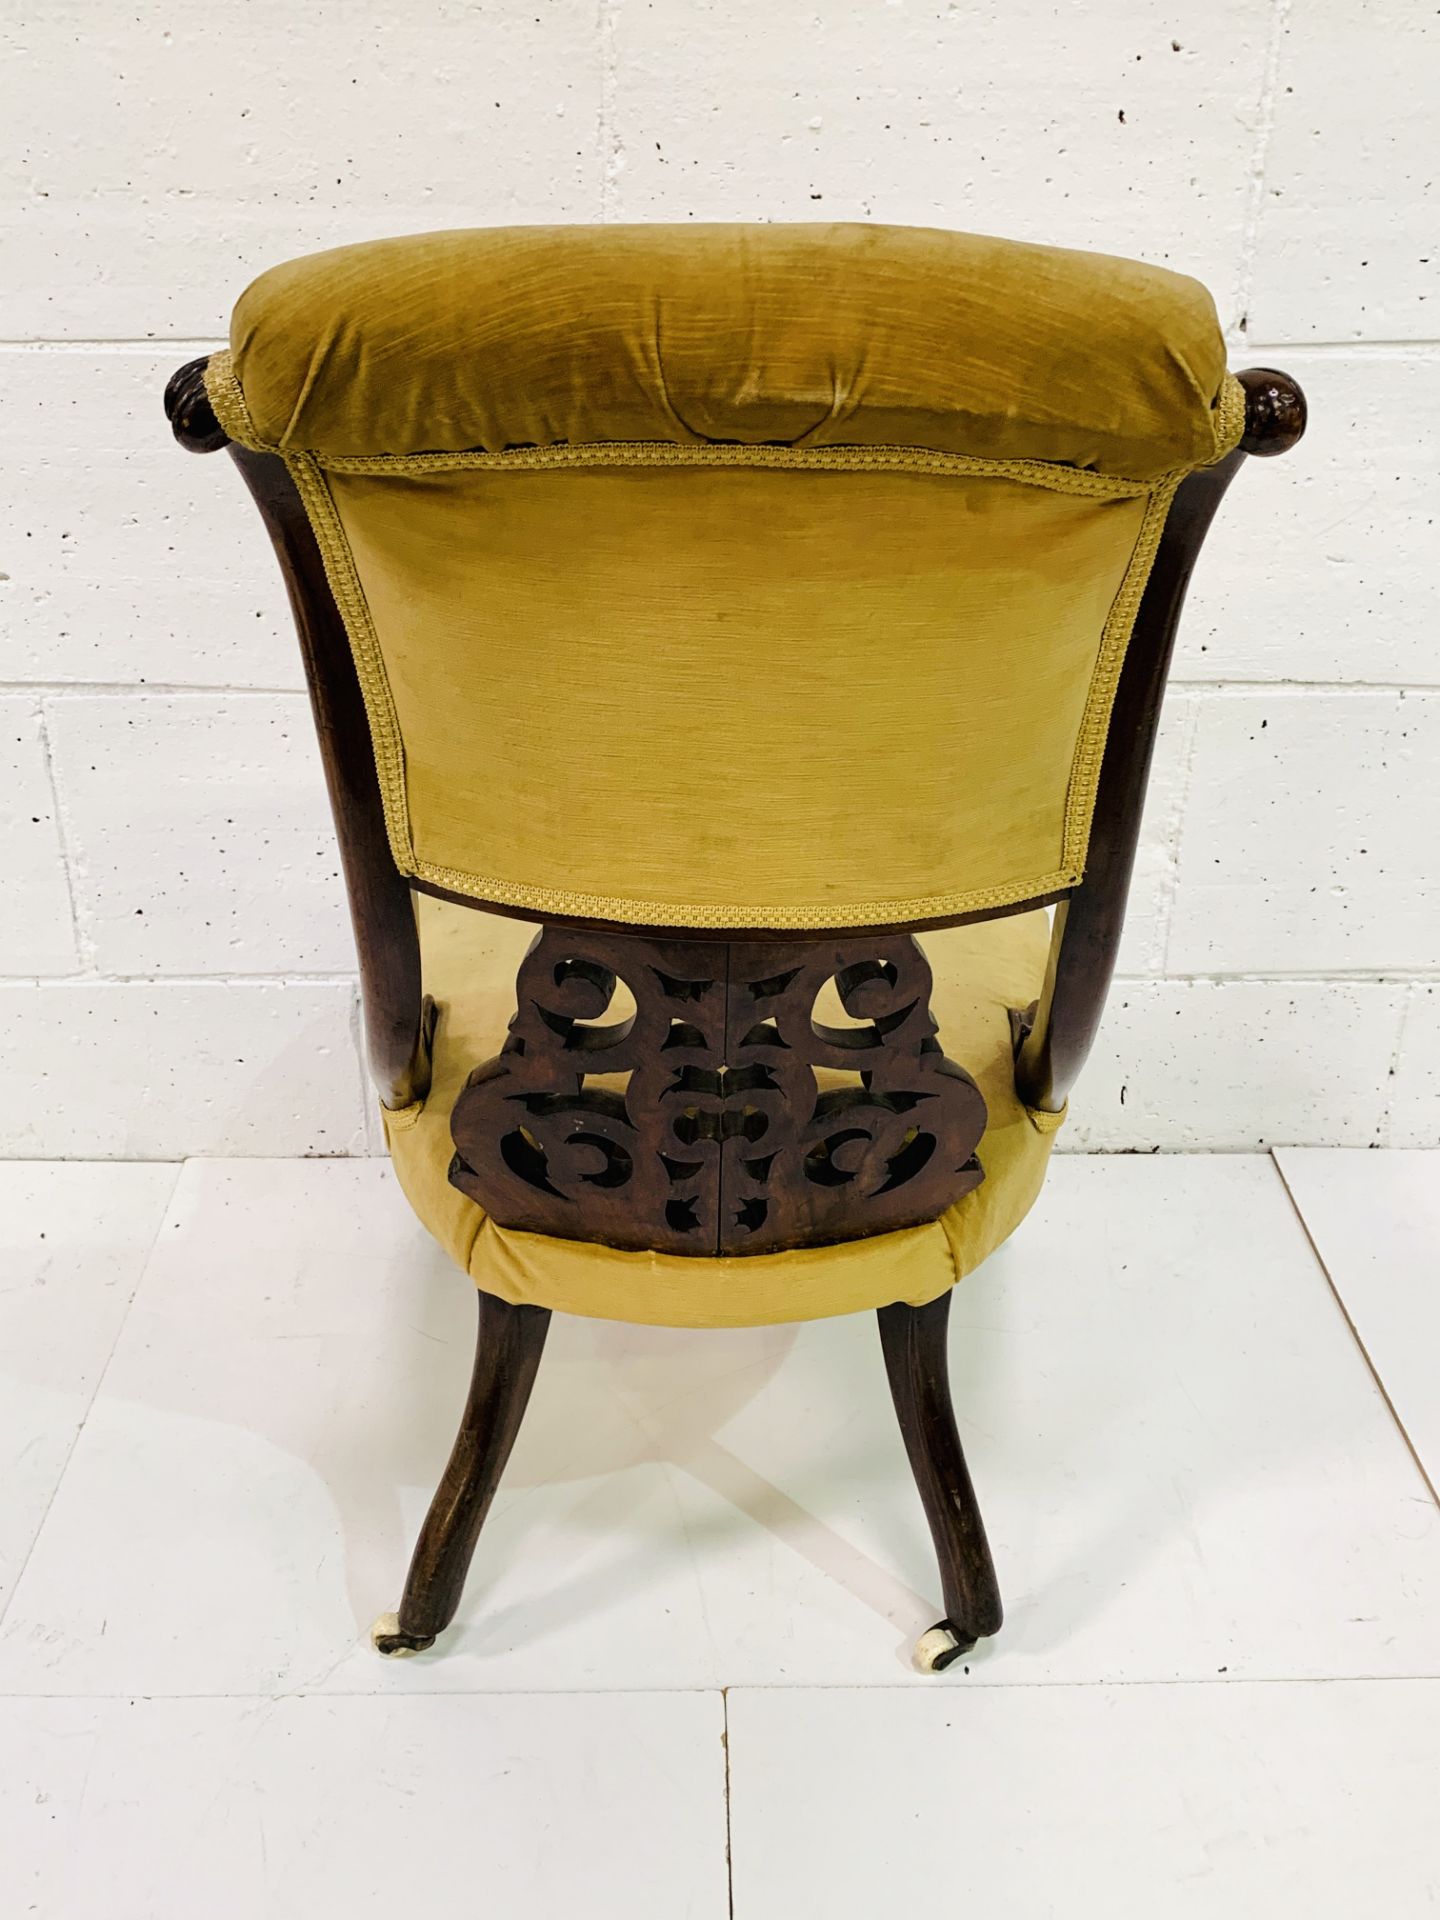 Ornately decorated mahogany framed drawing room chair with mustard yellow velvet upholstery. - Image 4 of 5